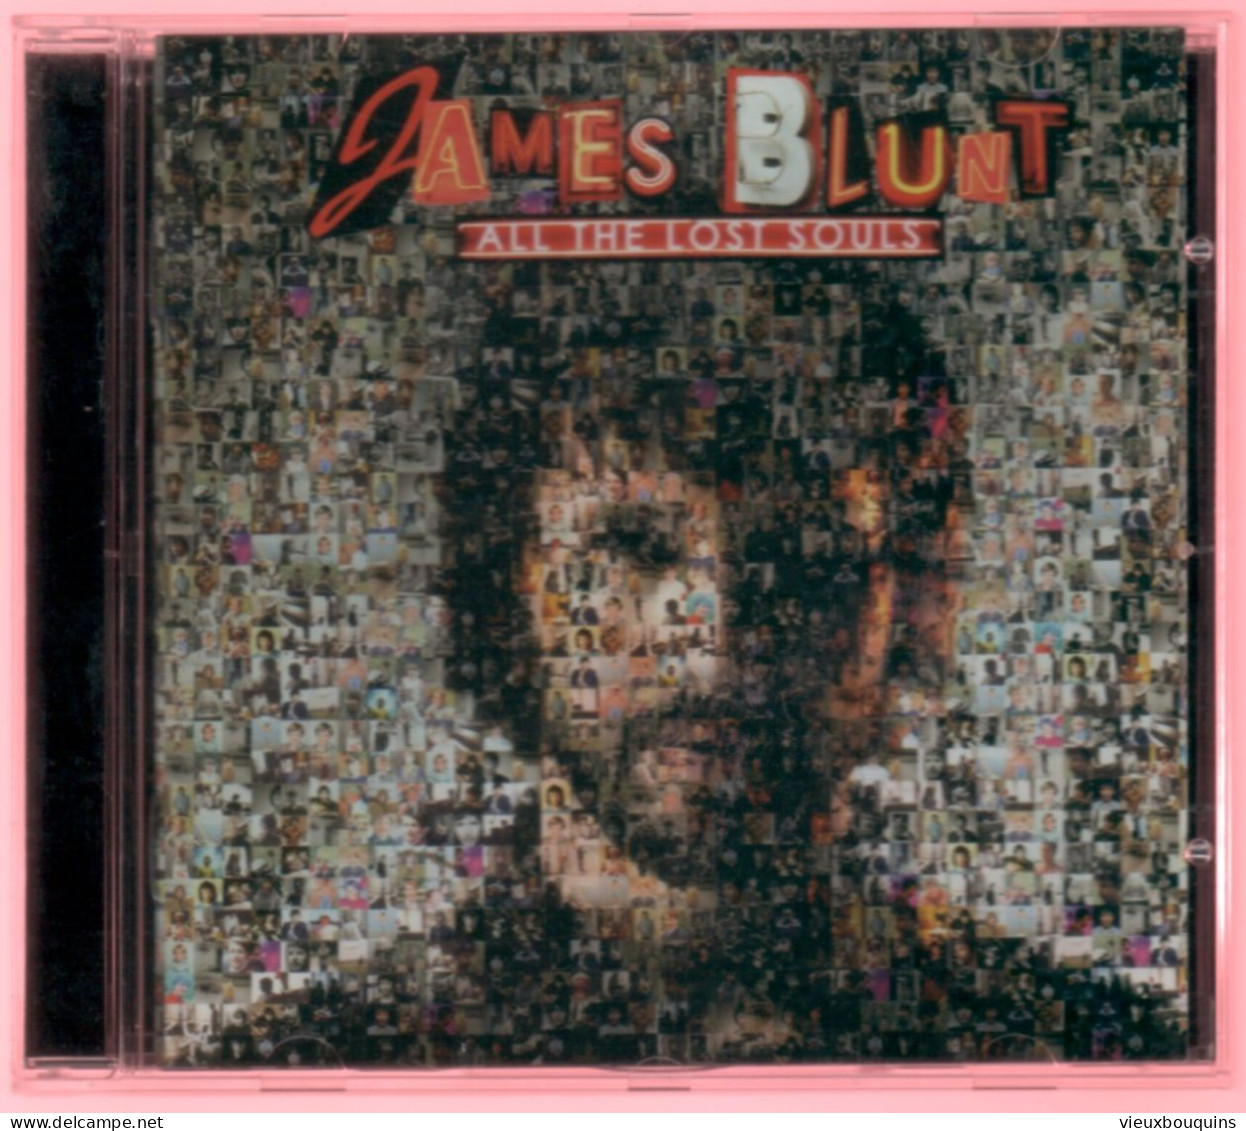 JAMES BLUNT : ALL THE LOST SOULS (voir Titres Sur Scan) - Other - English Music